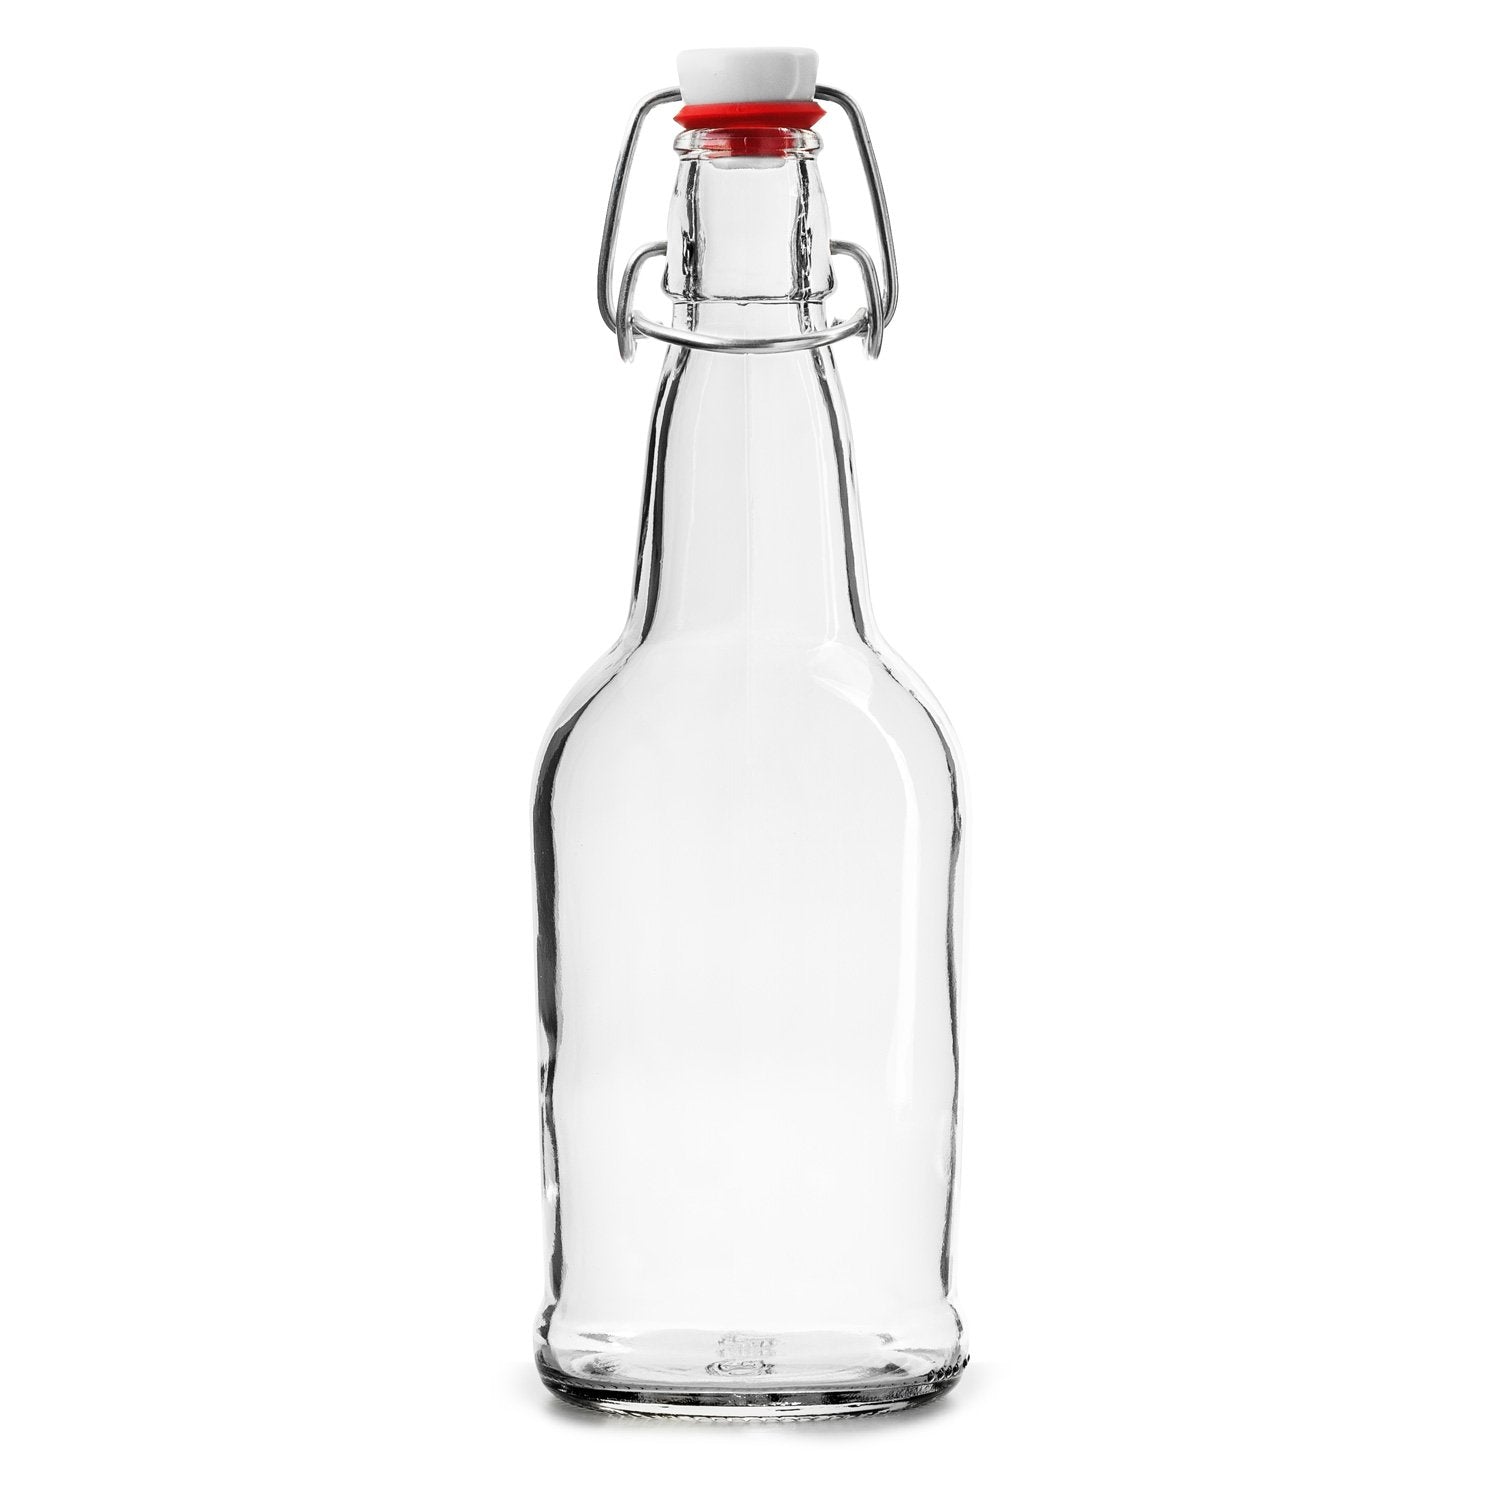 16 oz Glass Swing Top Bottles (12-Pack, Clear)